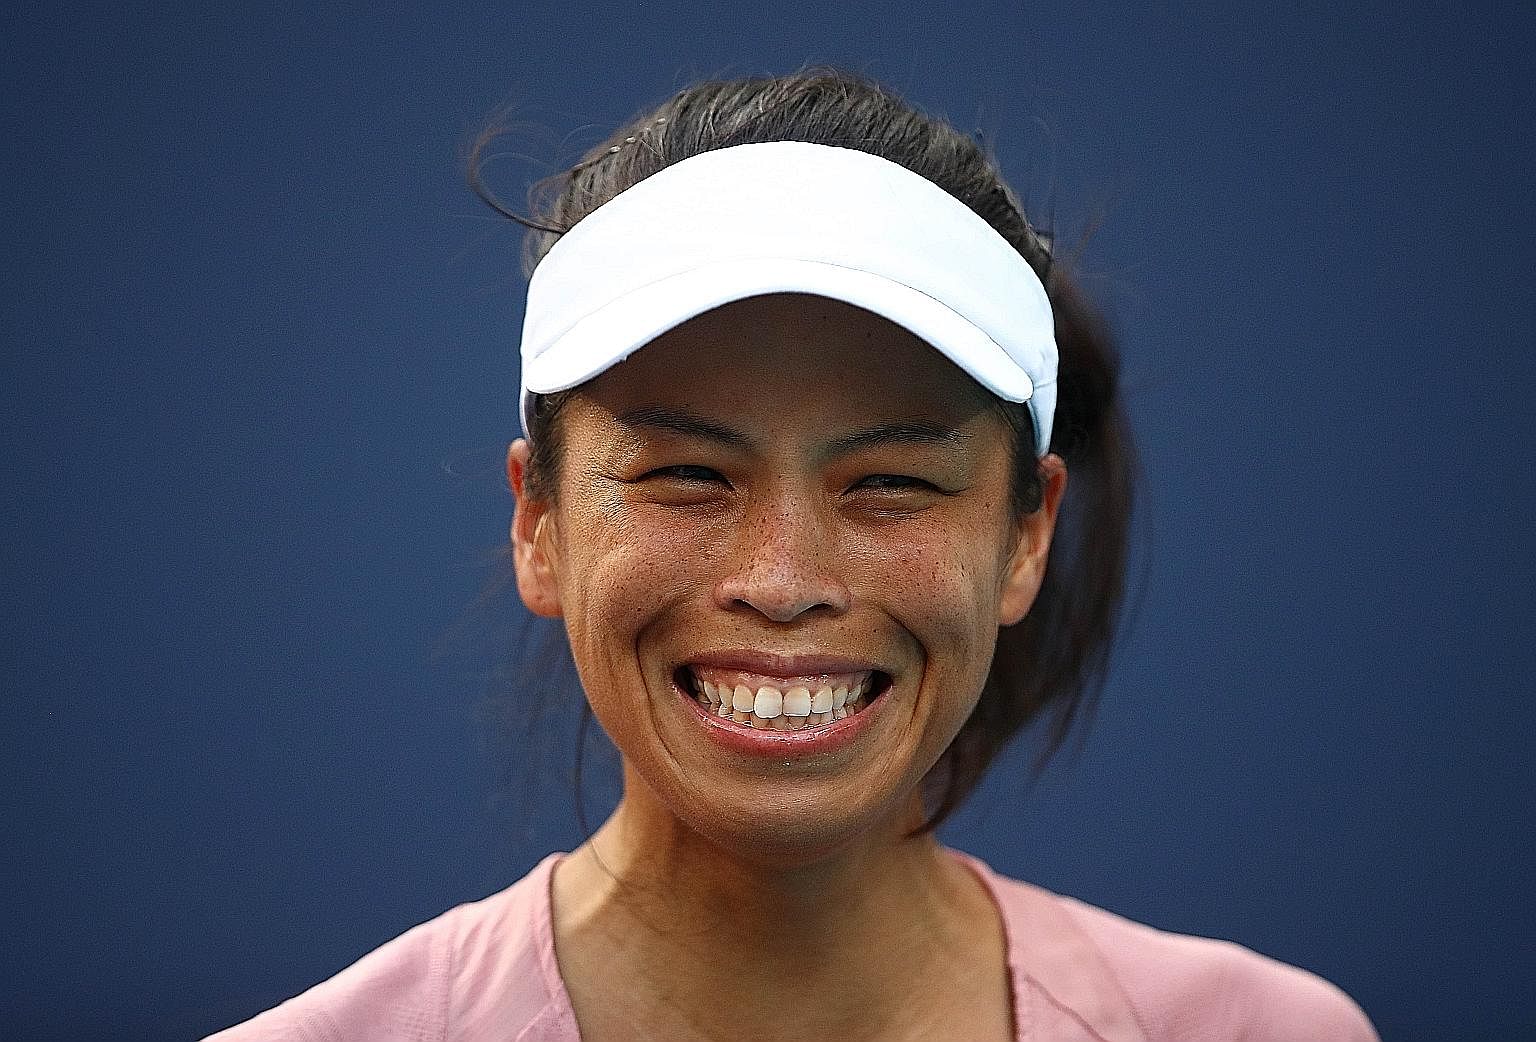 After her defeat by Hsieh Su-wei in Miami on Saturday, Naomi Osaka may lose her No. 1 ranking, with Romania's Simona Halep and Czech Petra Kvitova closing in on her.